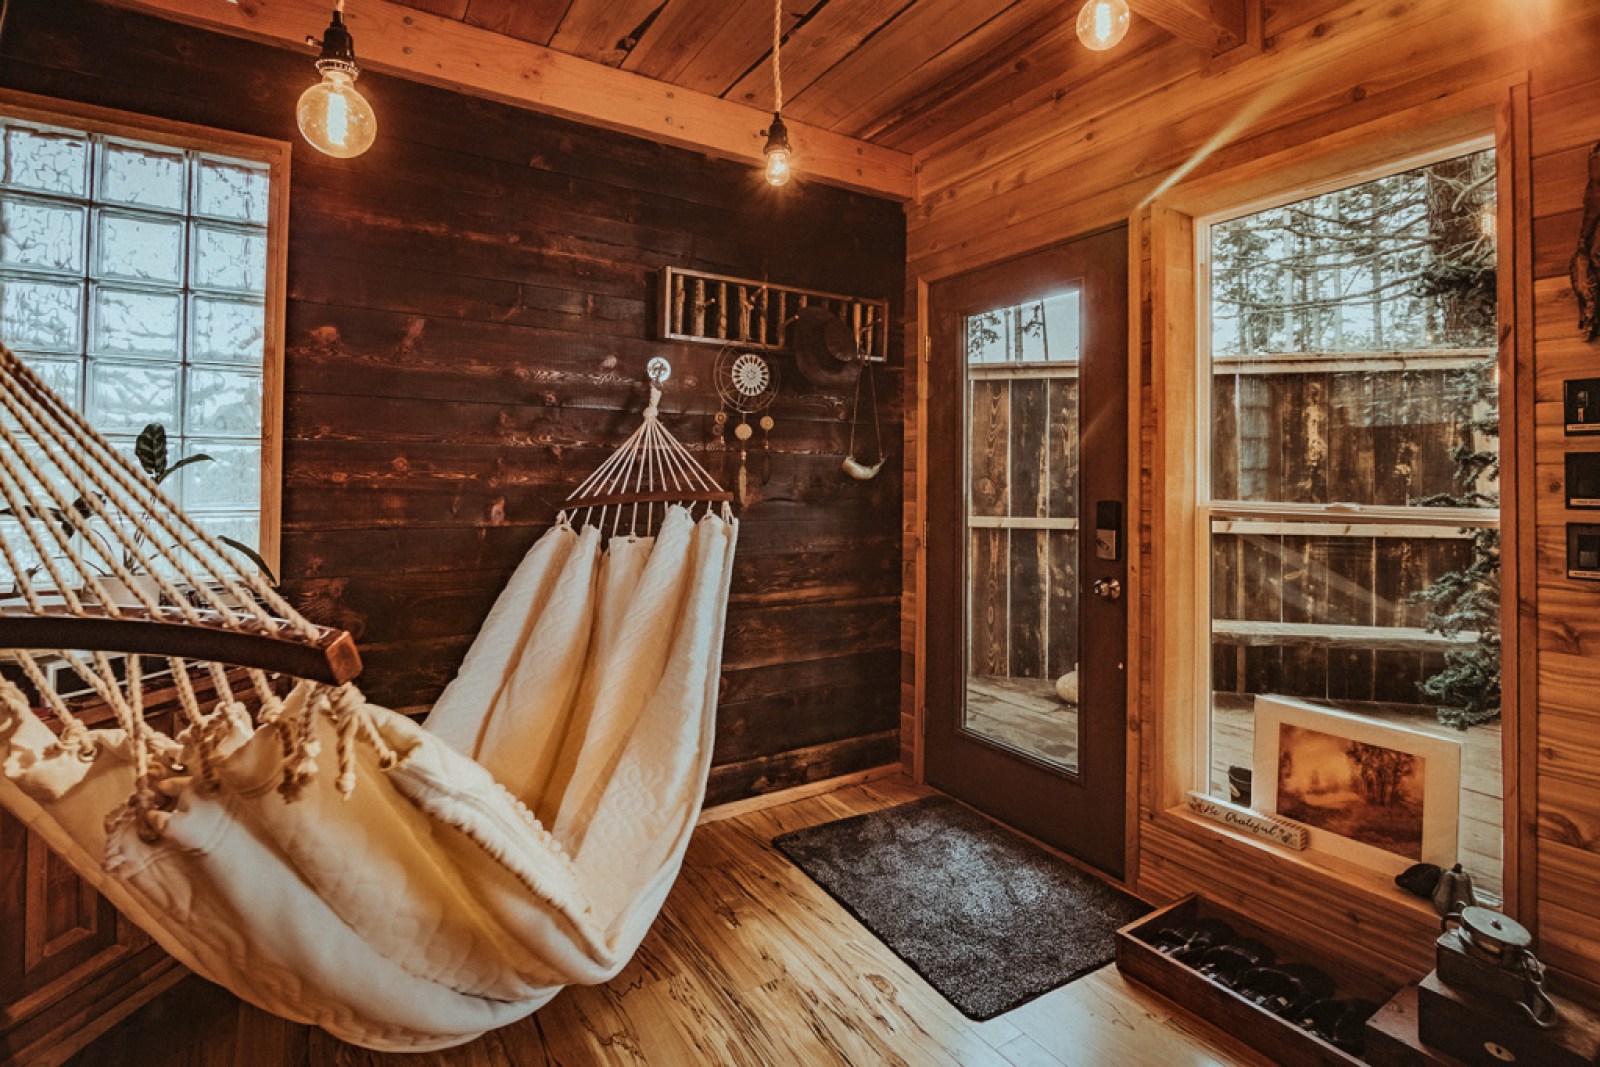 Wood cabin entryway with a hammock hanging from the walls.